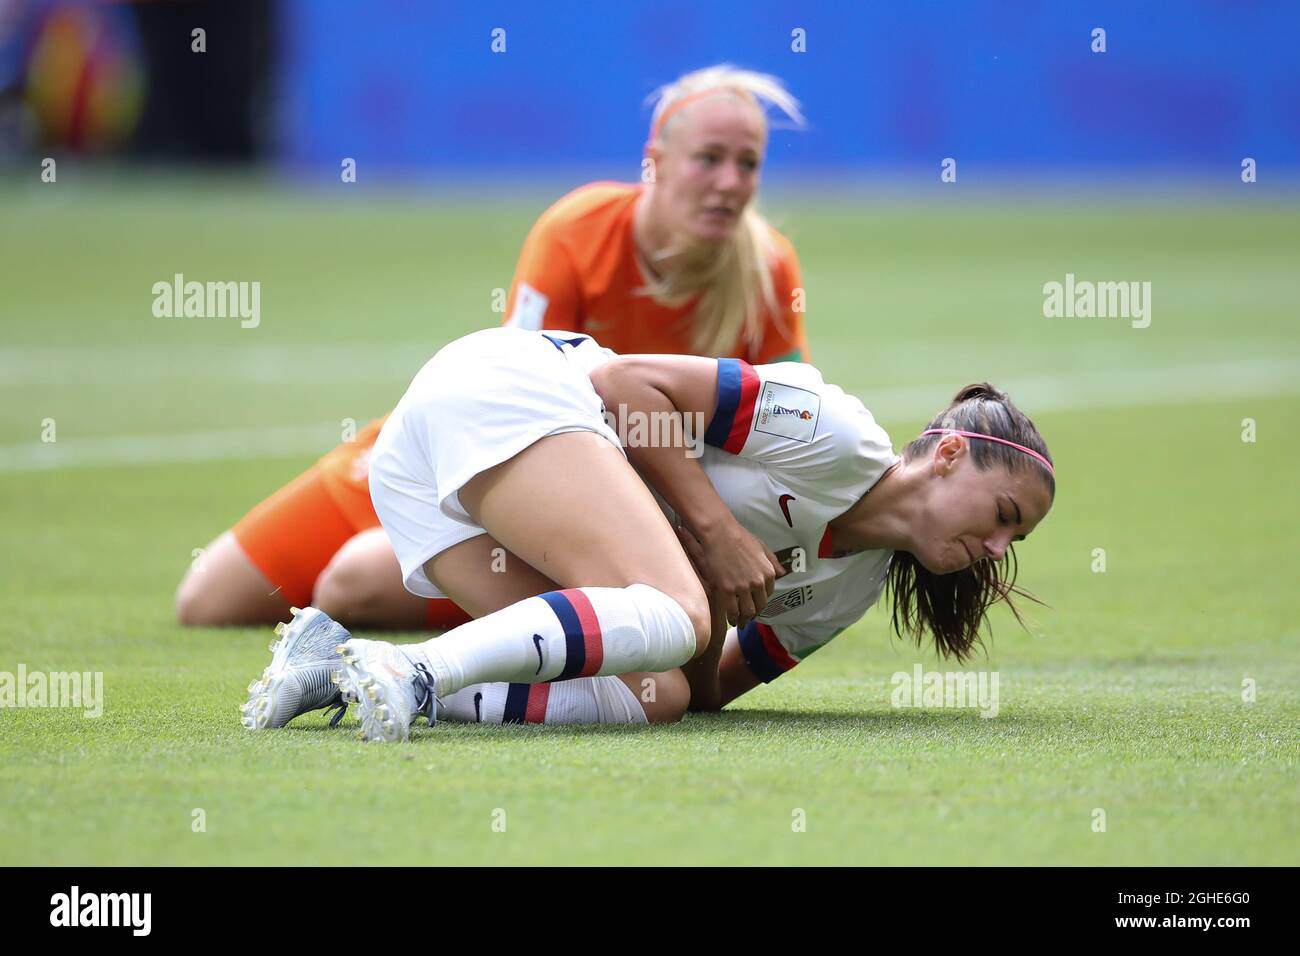 Alex Morgan of USA rolls in agony in the penalty area after being fouled by Stefanie Van Der Gragt of Holland to concede a penalty during the FIFA Women's World Cup match at Stade de Lyon, Lyon. Picture date: 7th July 2019. Picture credit should read: Jonathan Moscrop/Sportimage via PA Images Stock Photo